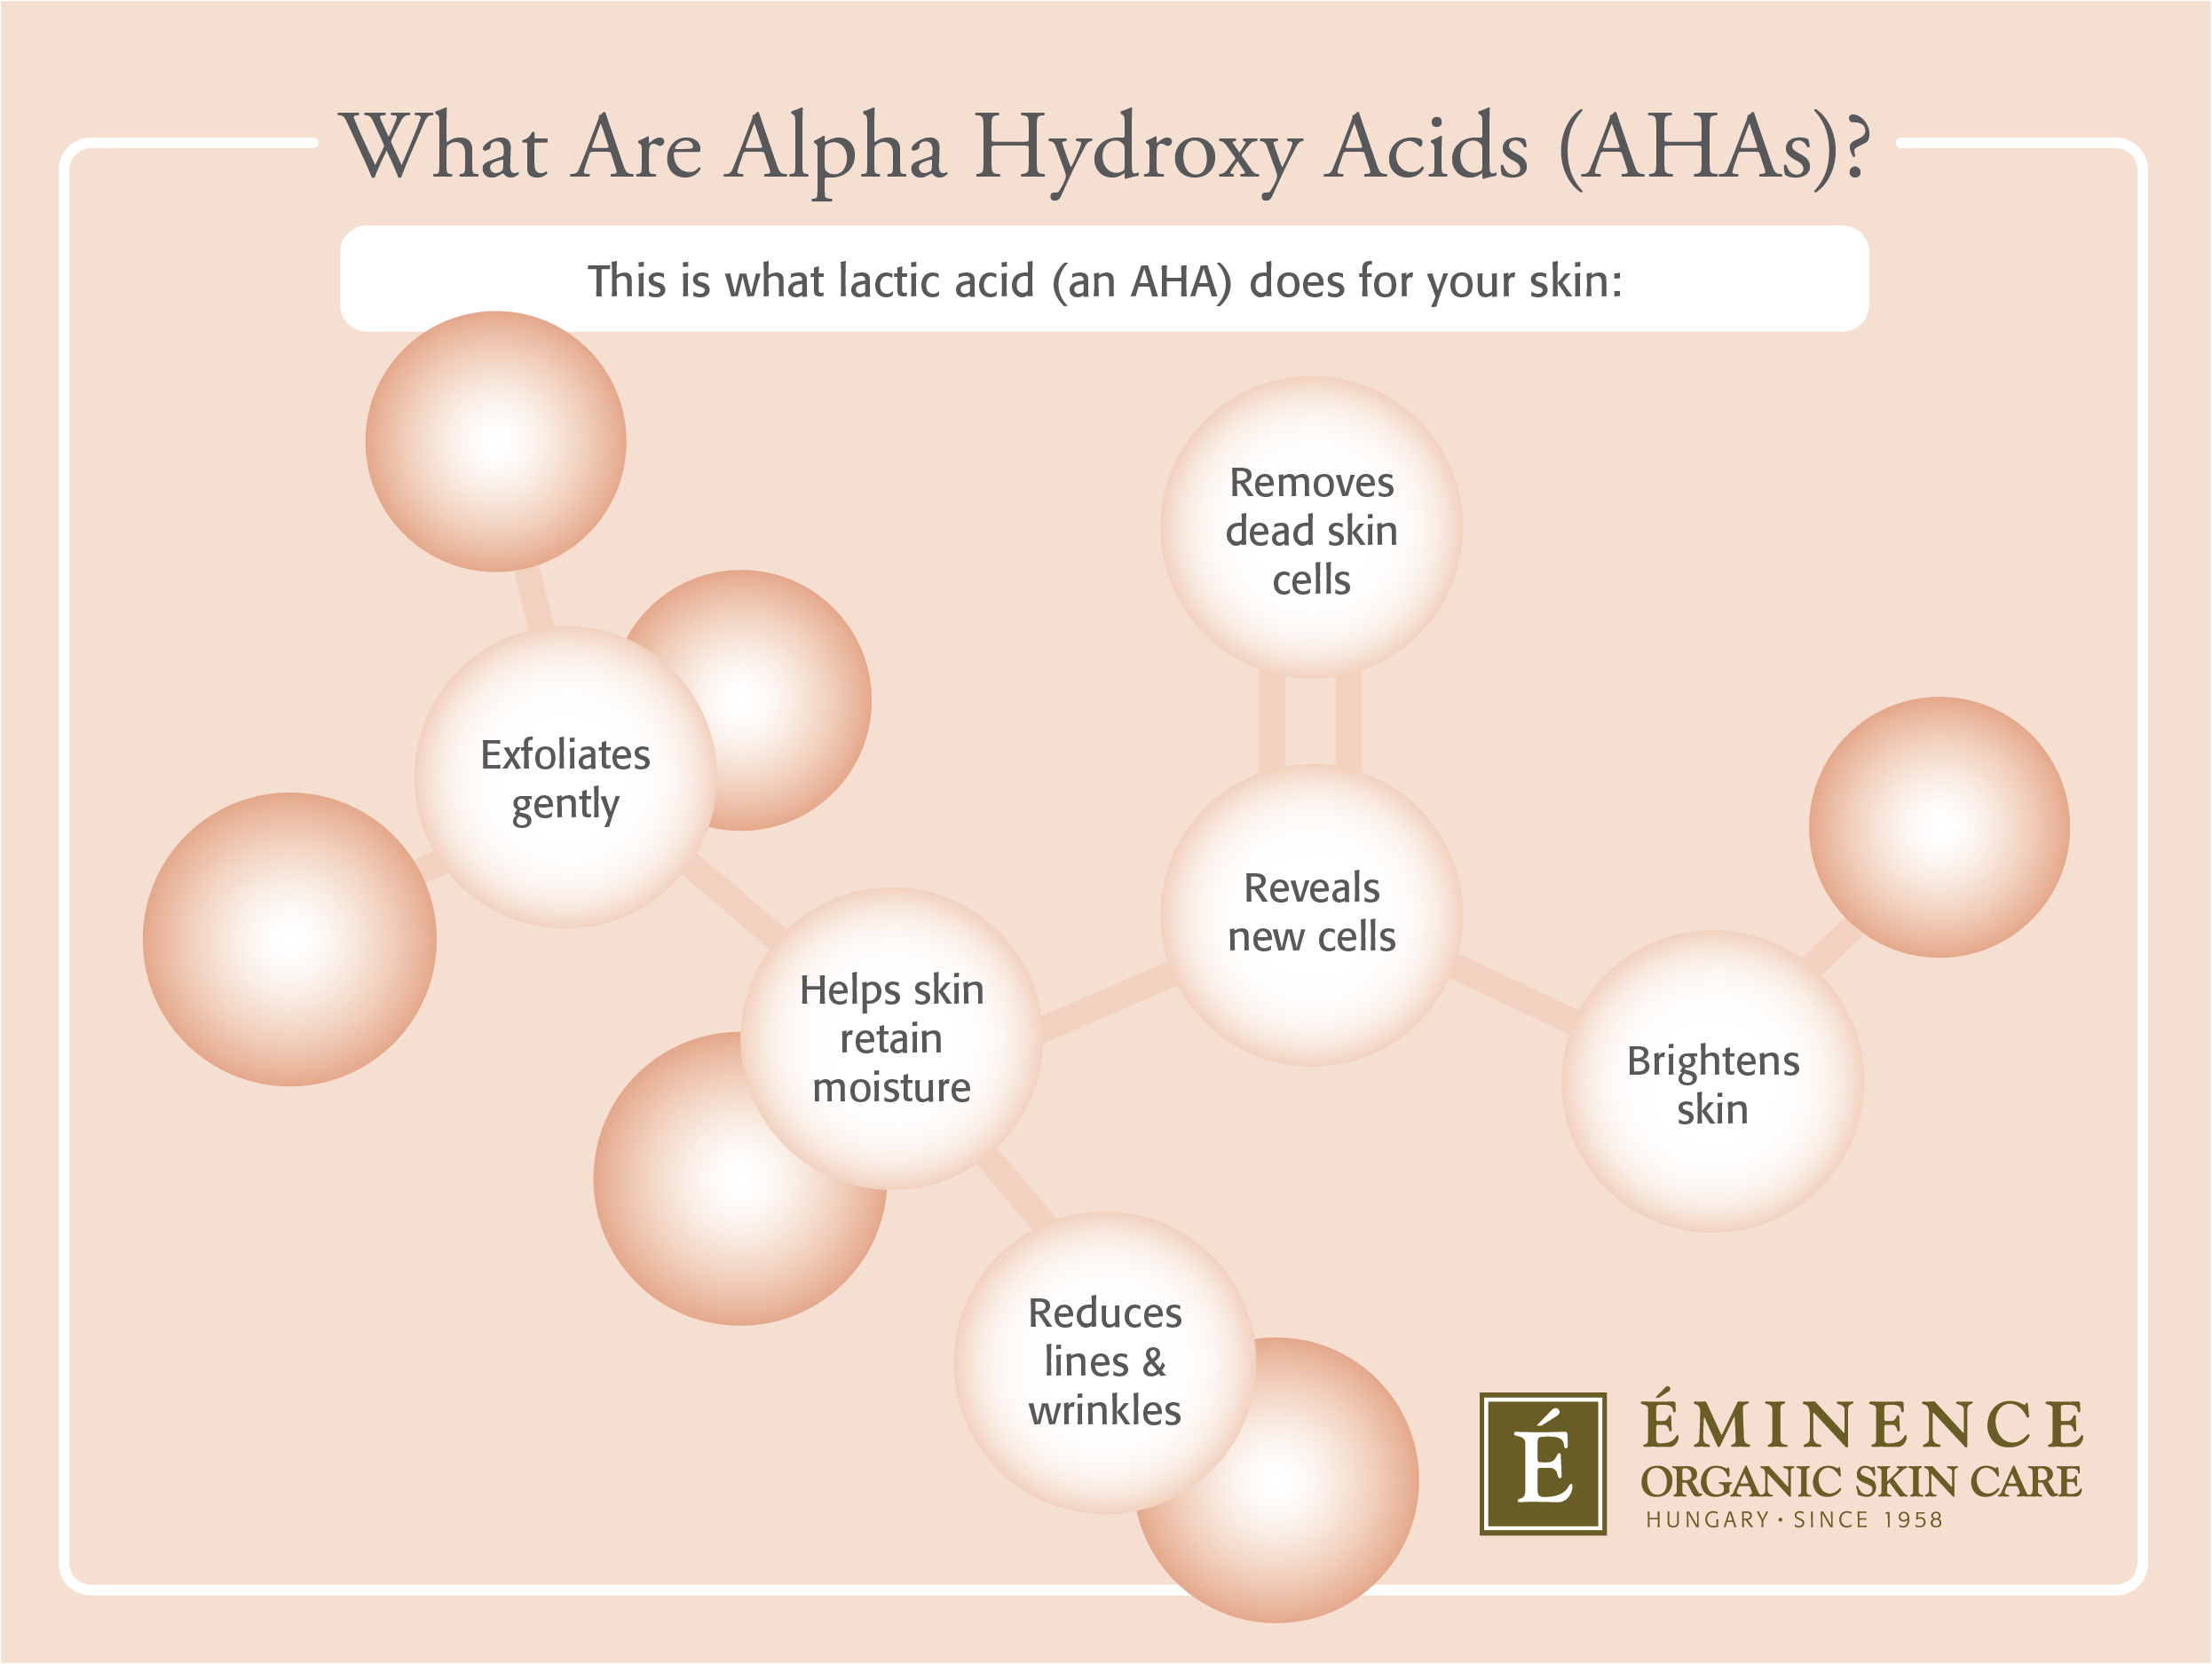 Diagram of what Alpha Hydroxy Acids (AHAs) can do for your skin